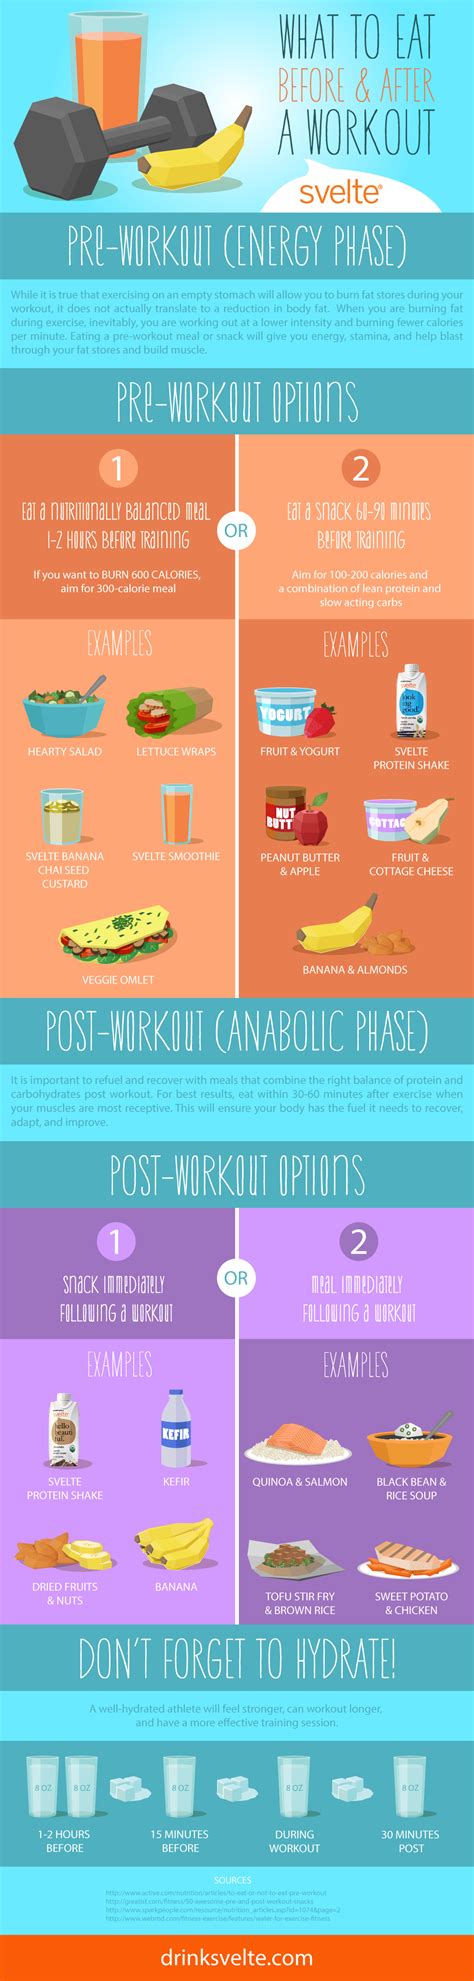 Should you eat before or after a workout. What to Eat Before and After Your Workout #infographic ...